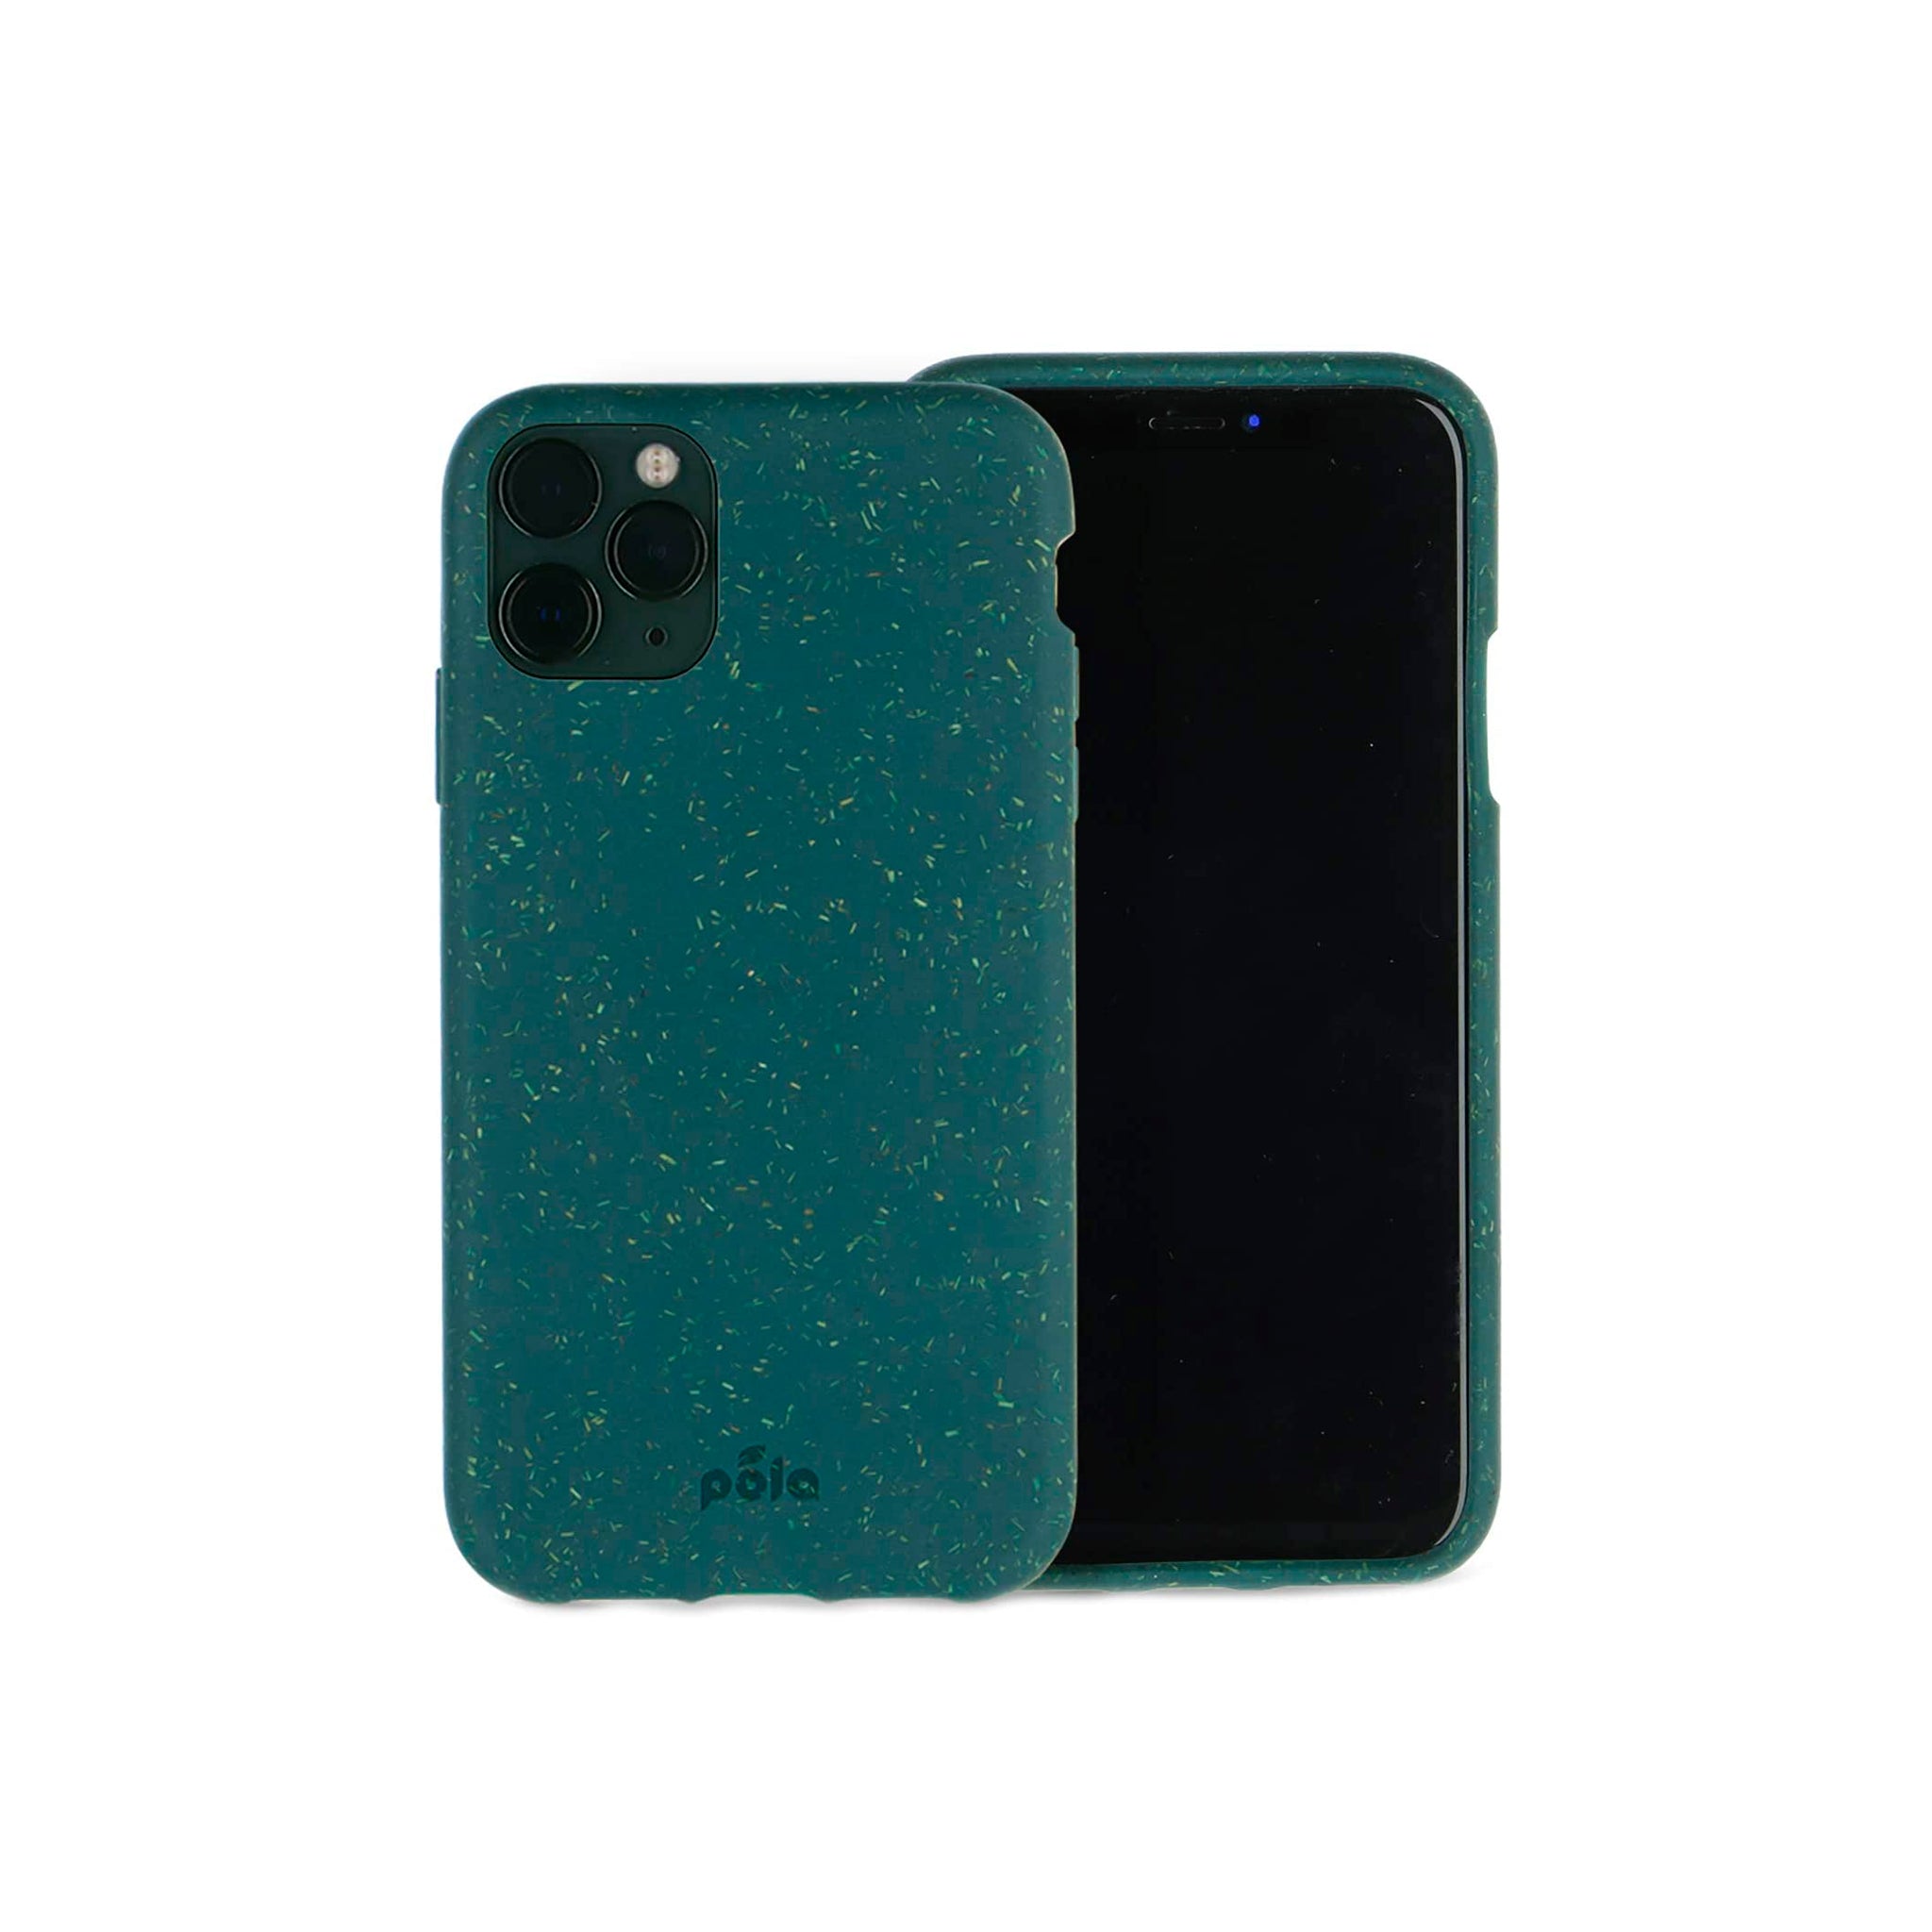 Pela - Eco Friendly Case For Apple Iphone 11 Pro Max - Green